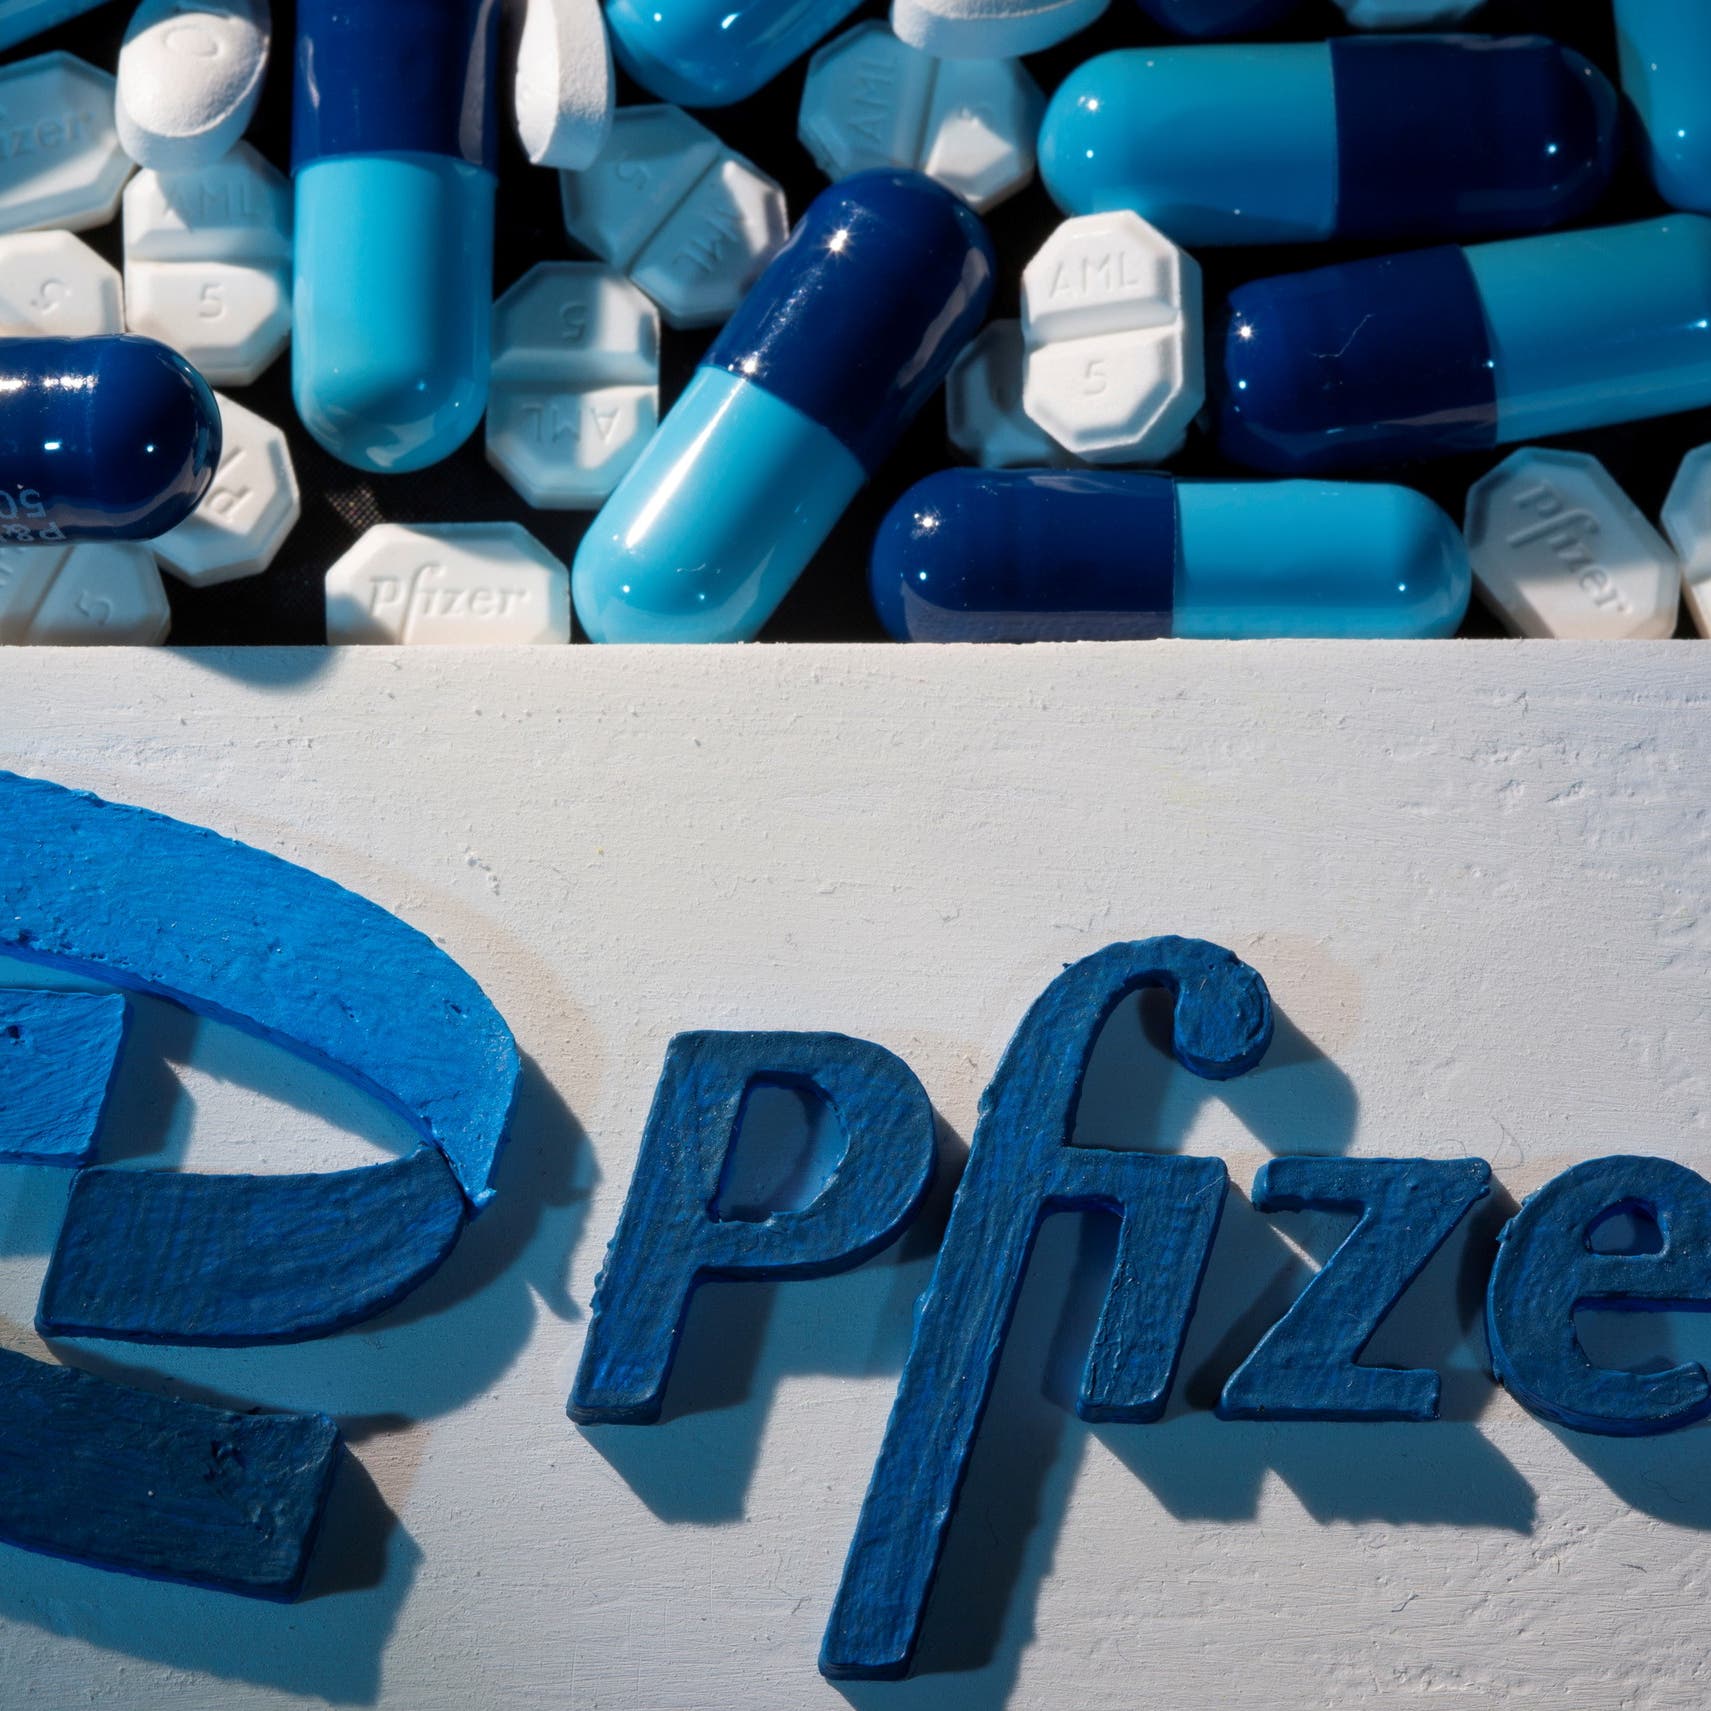 Pfizer to allow generic versions of its COVID-19 pill paxlovid in 95 countries